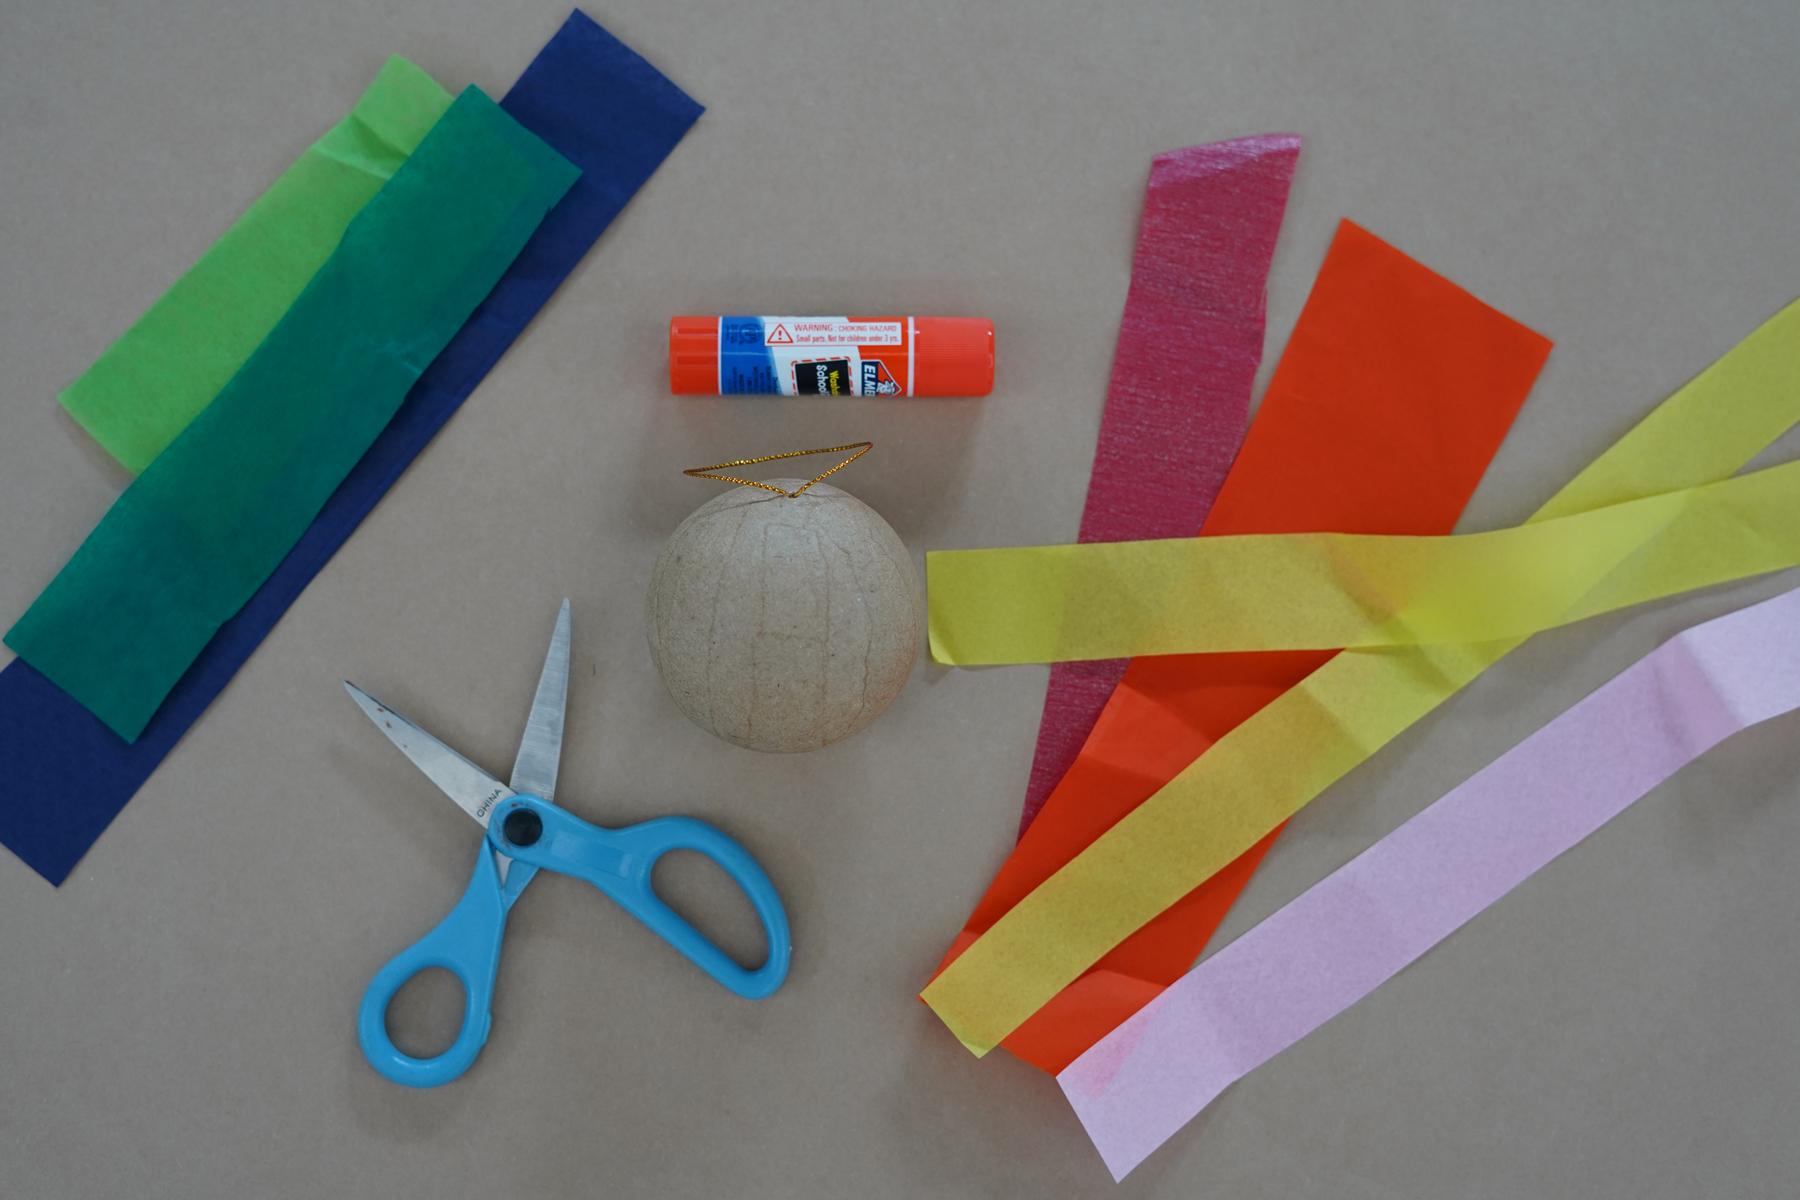 Photo of art supplies on a table including tissue paper in a variety of colors, scissors, a glue stick, and a cardboard ball